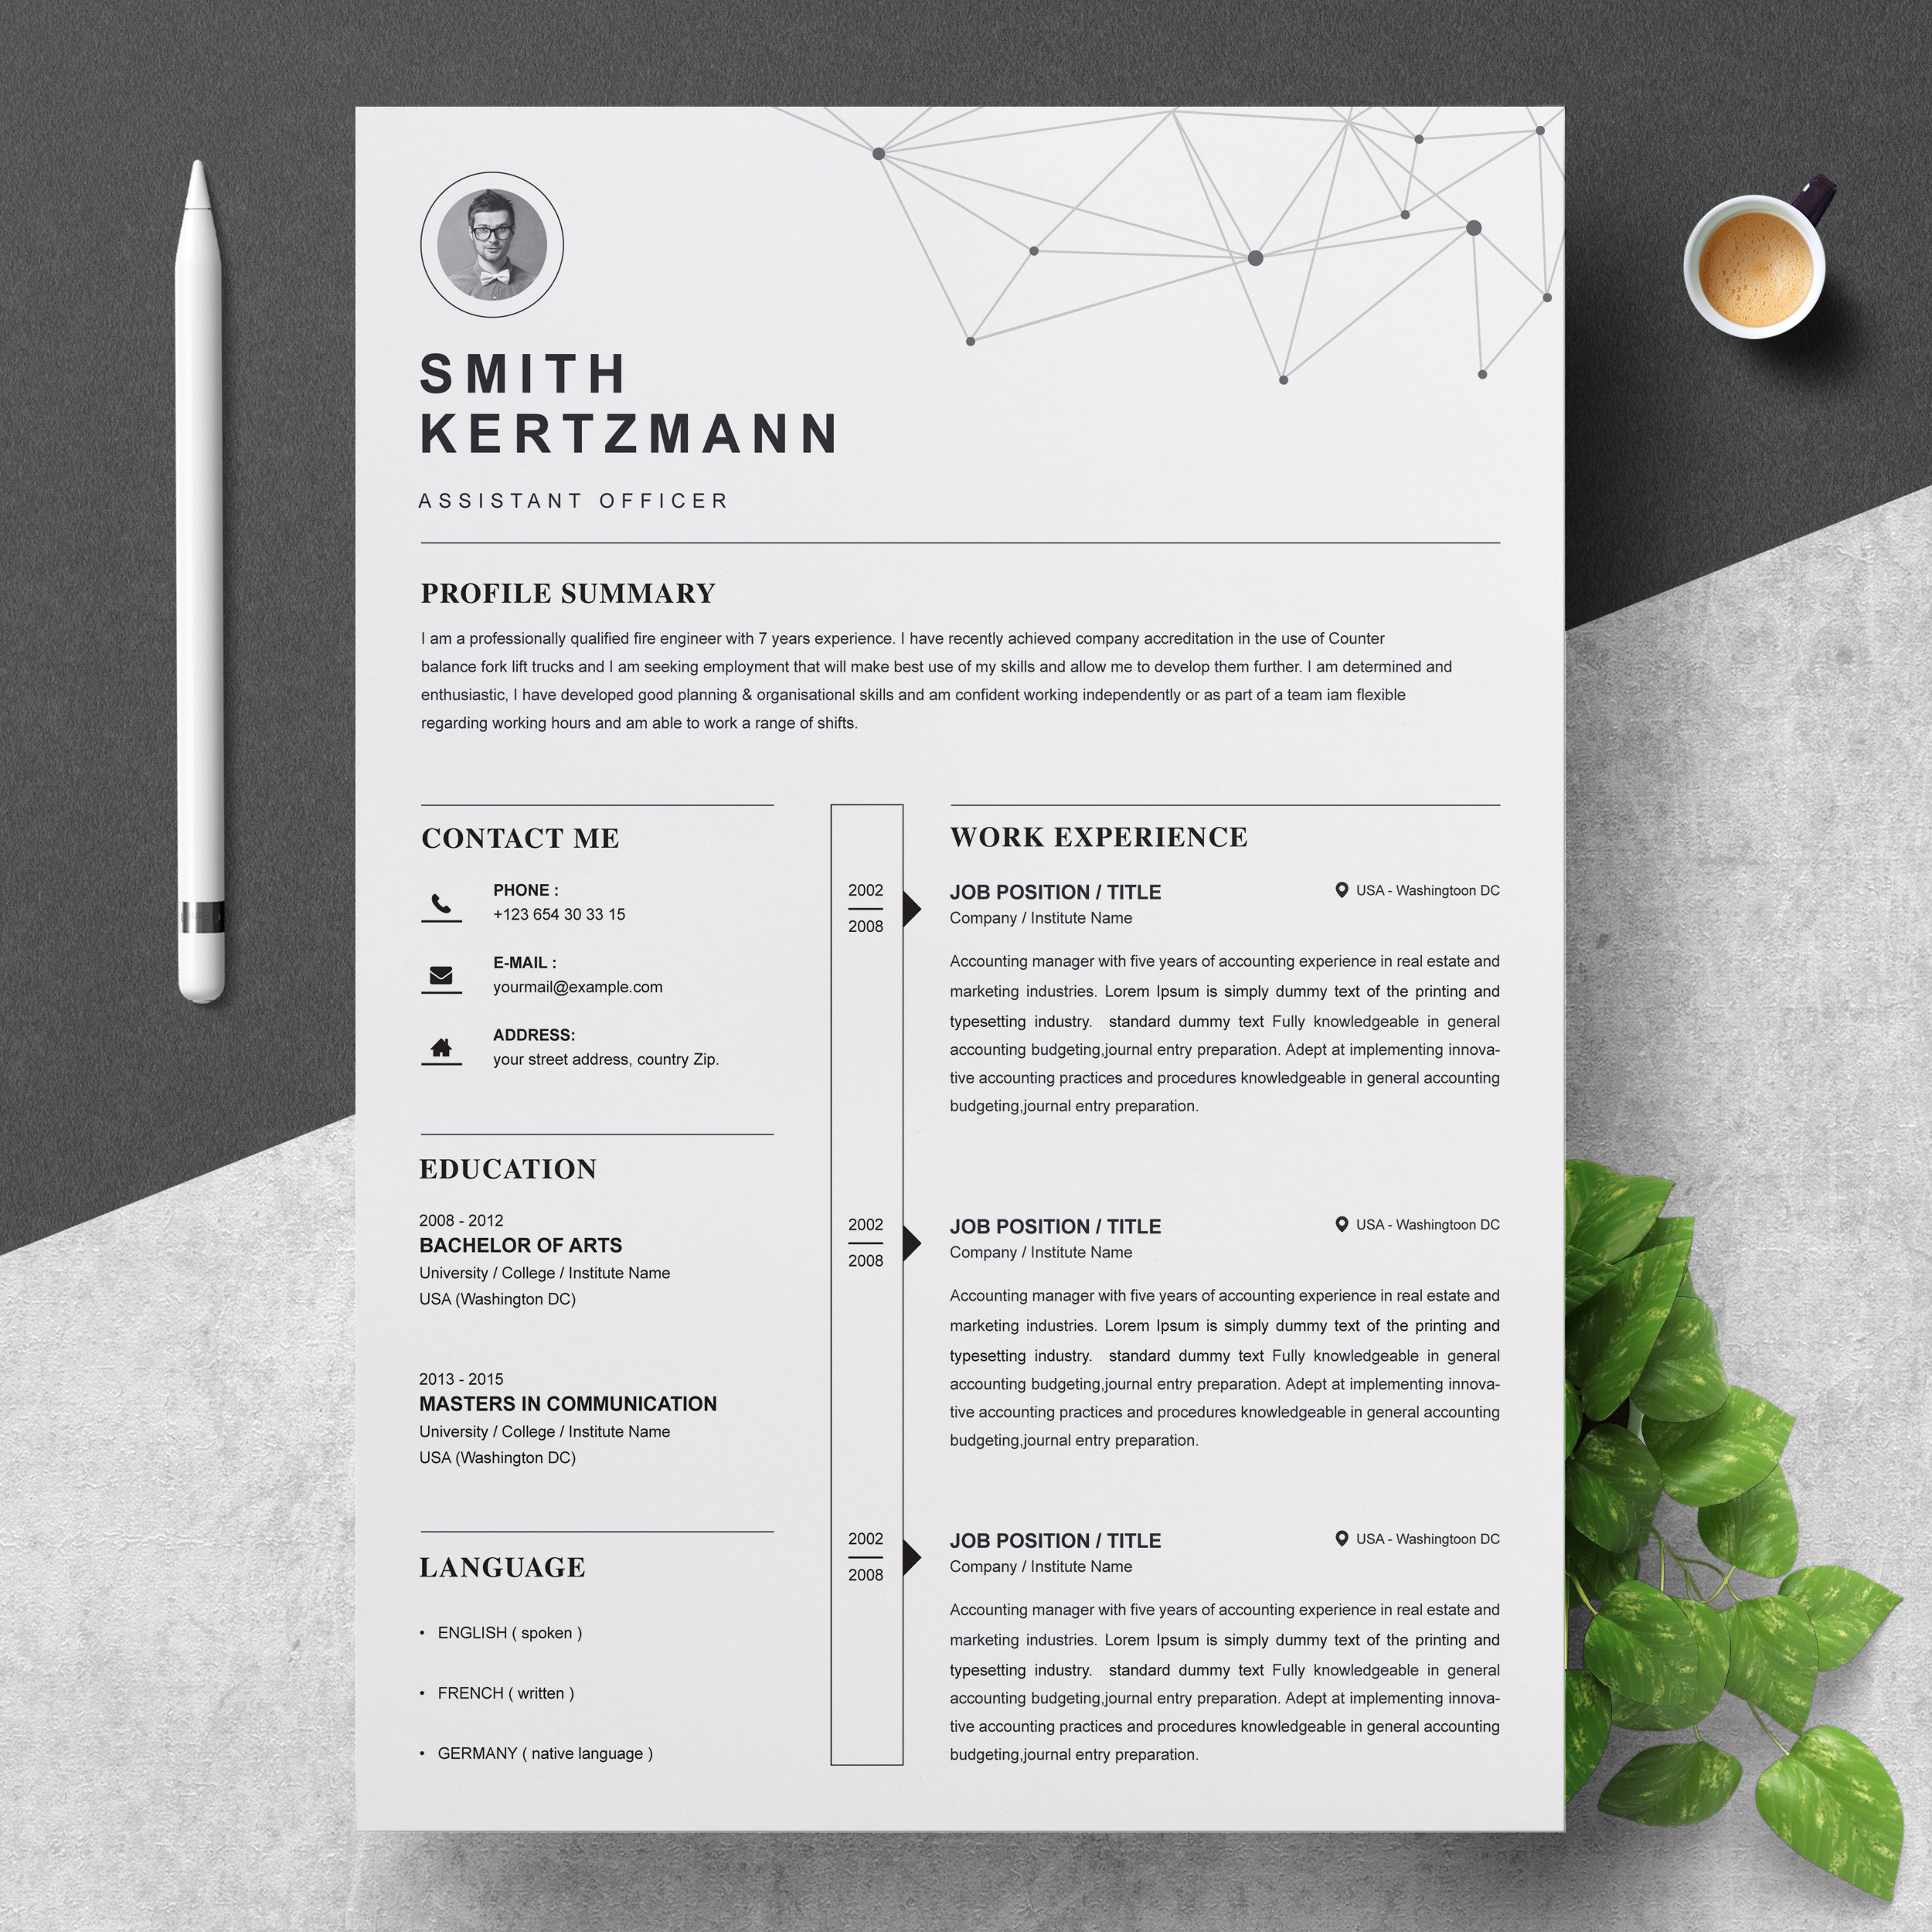 Best Resume Templates for Free Download Professional Resume Template â Free Resumes, Templates Pixelify.net